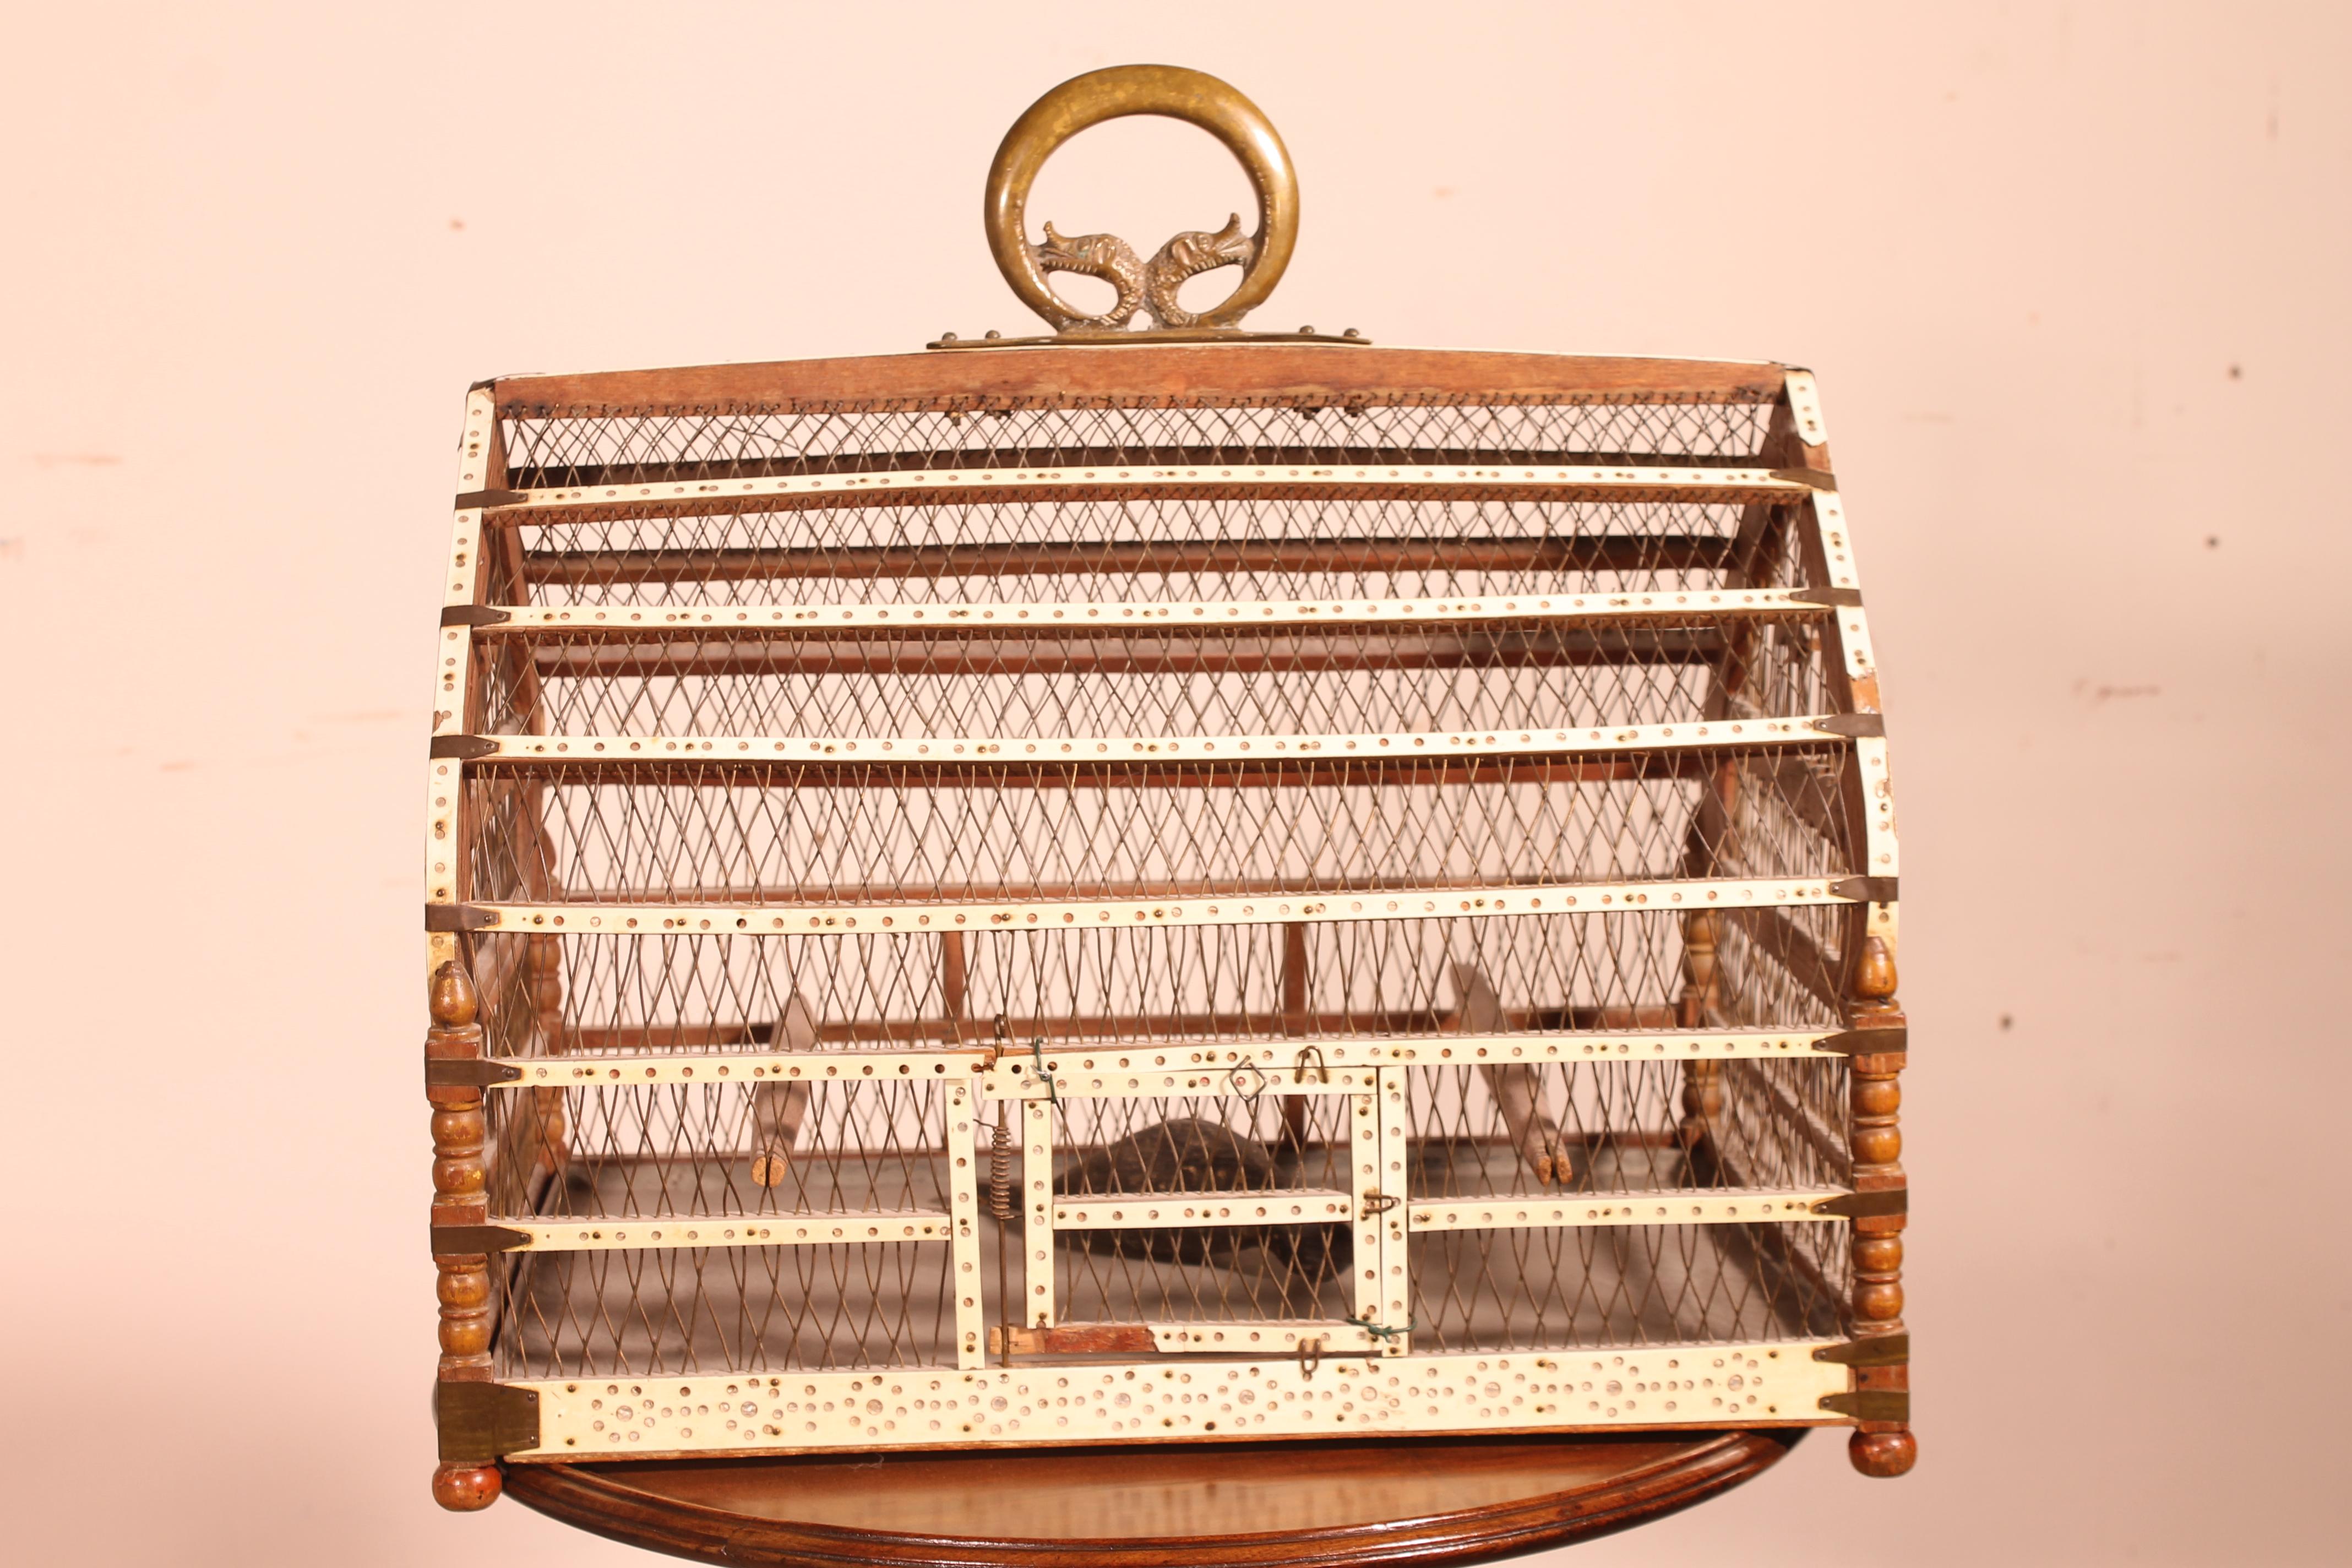 Elegant bird cage in bone and wood from the 19th century
Very beautiful bird cage from Moorish influence southern Spain
Very beautiful patina and in very good condition
Small wear due to use.